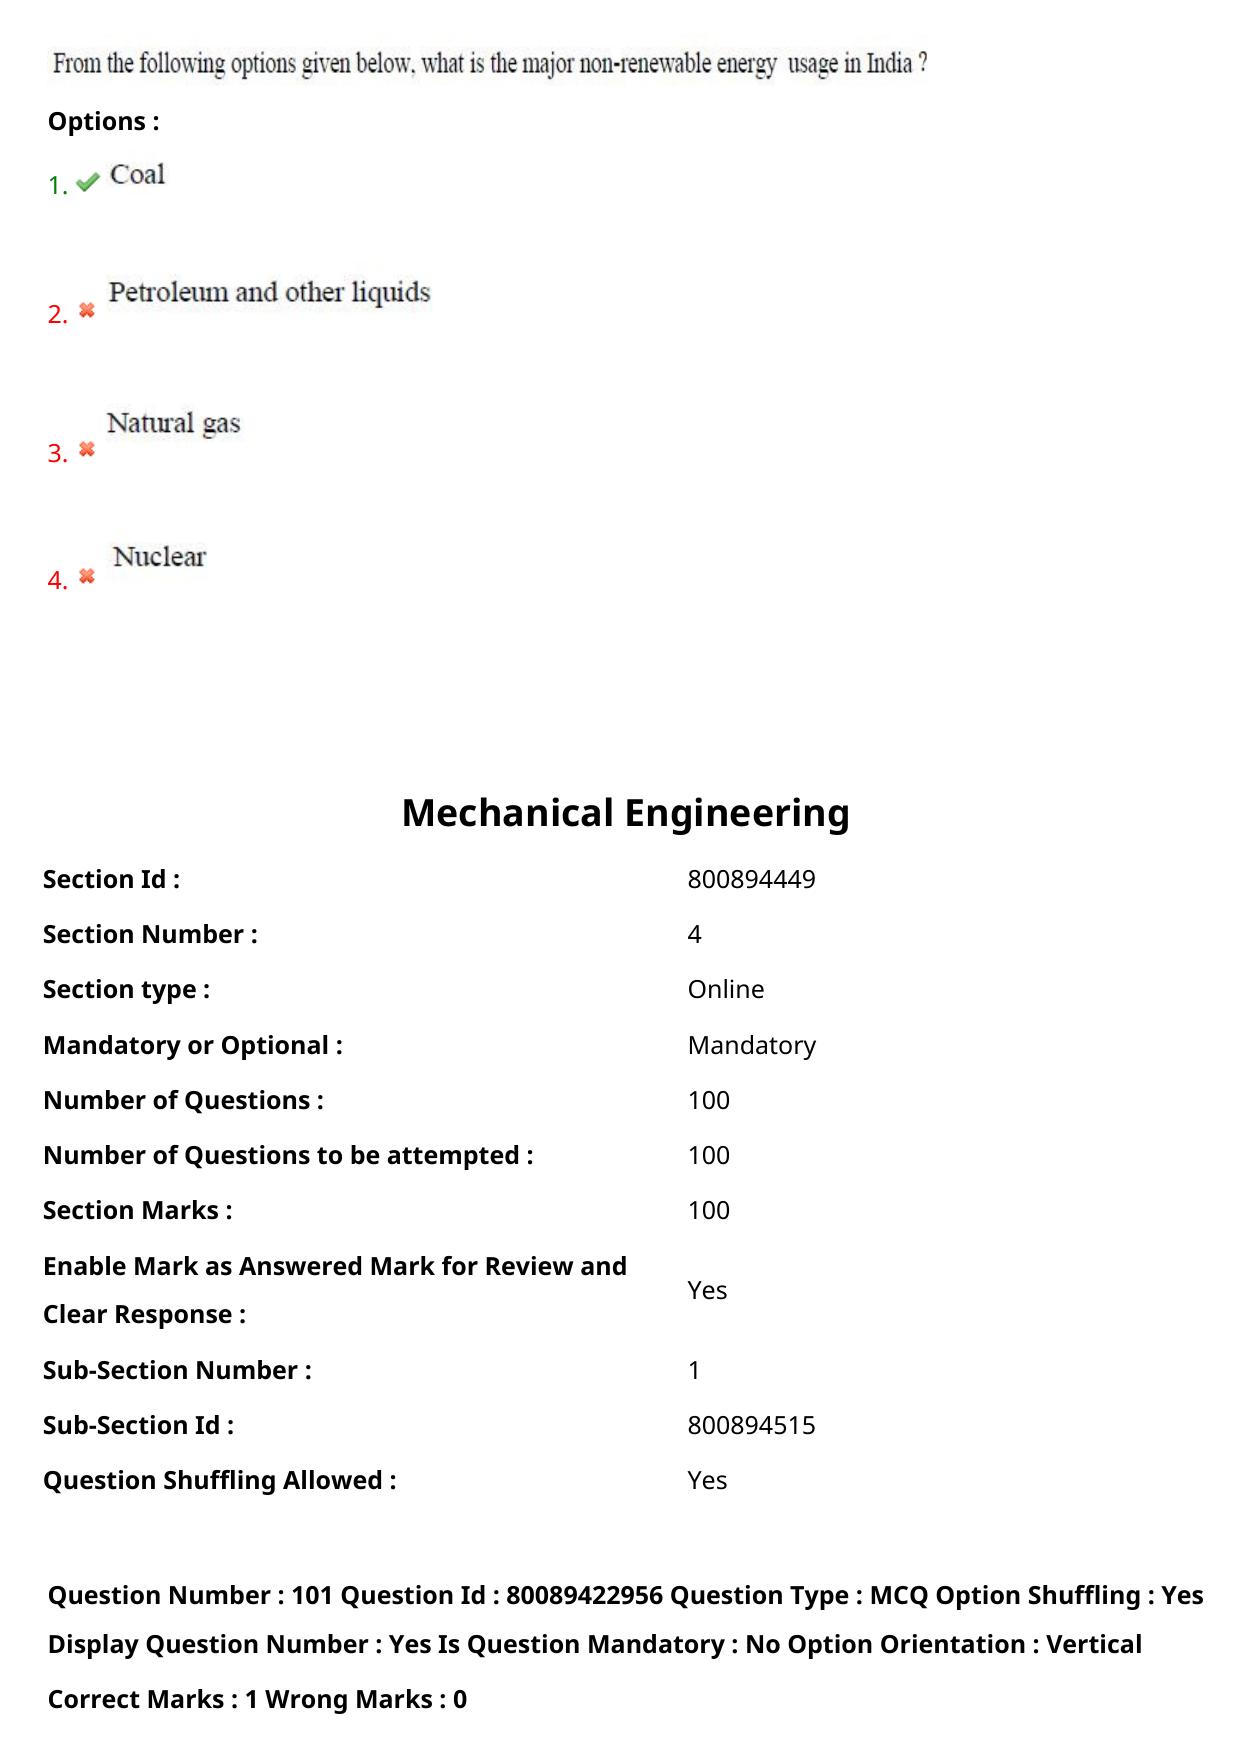 TS ECET 2021 Mechanical Engineering Question Paper - Page 56